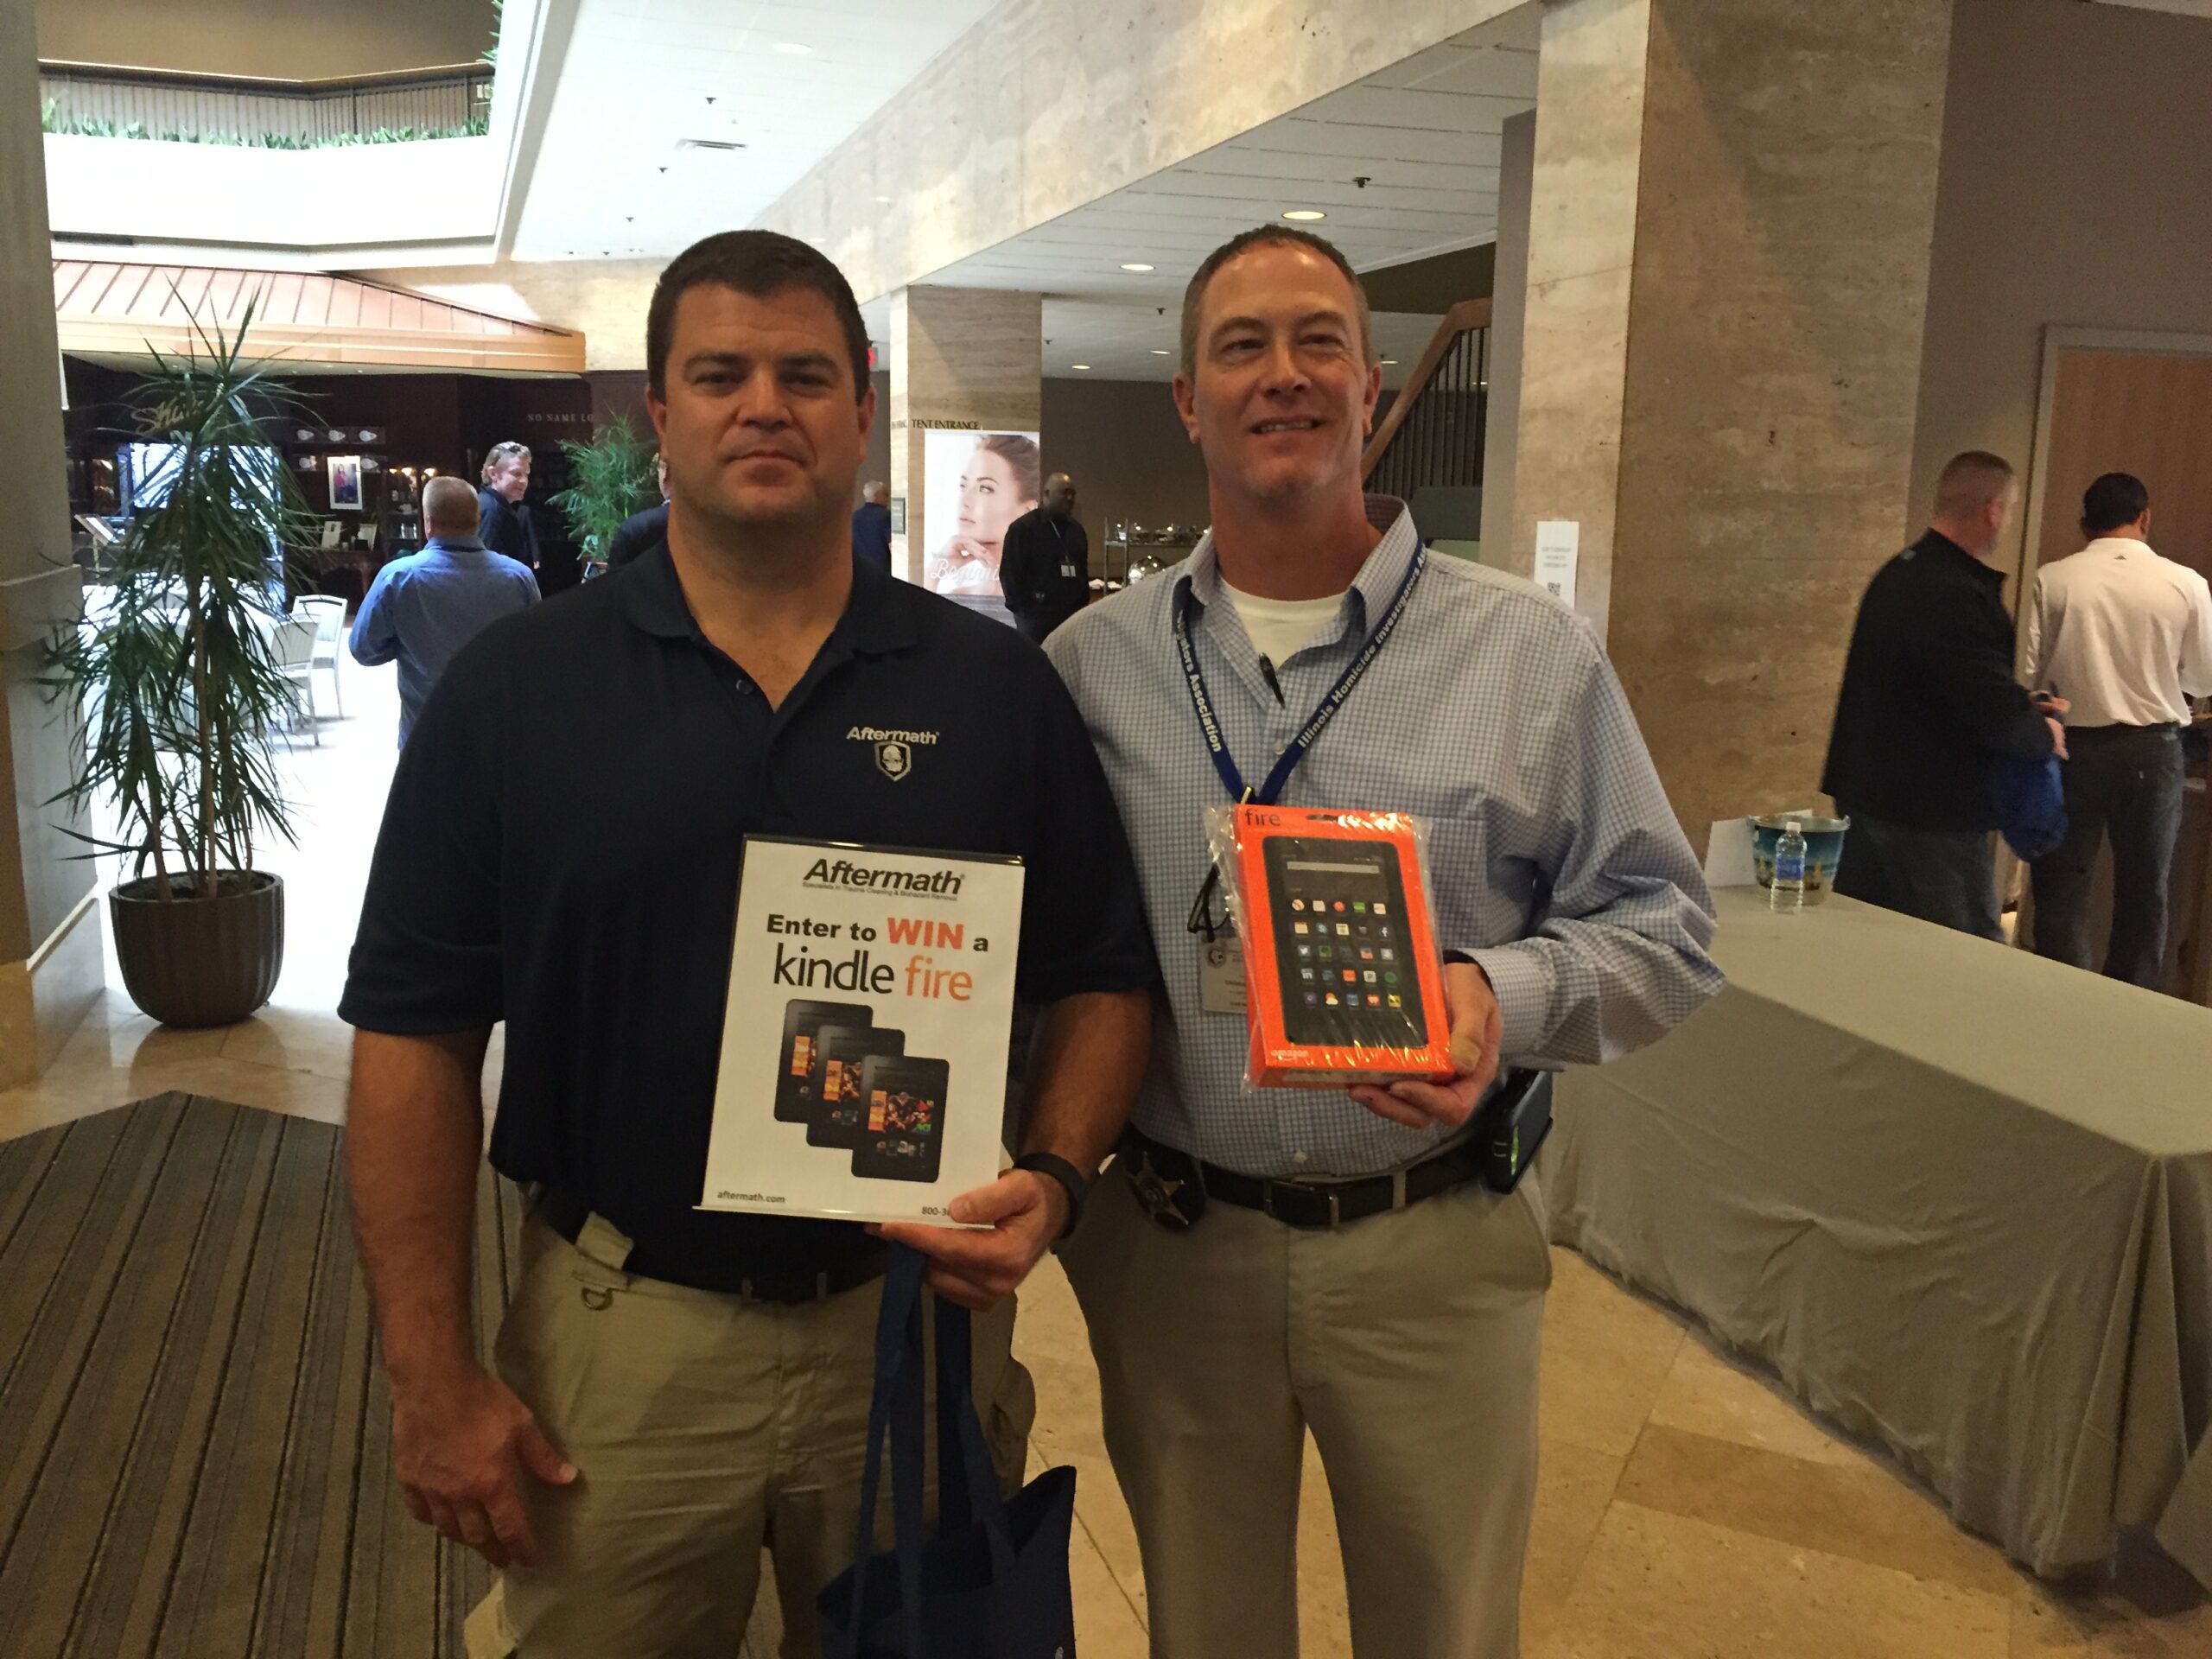 Winners of Kindle Fire giveaway at Illinois Homicide Inv. Assoc. Conf.